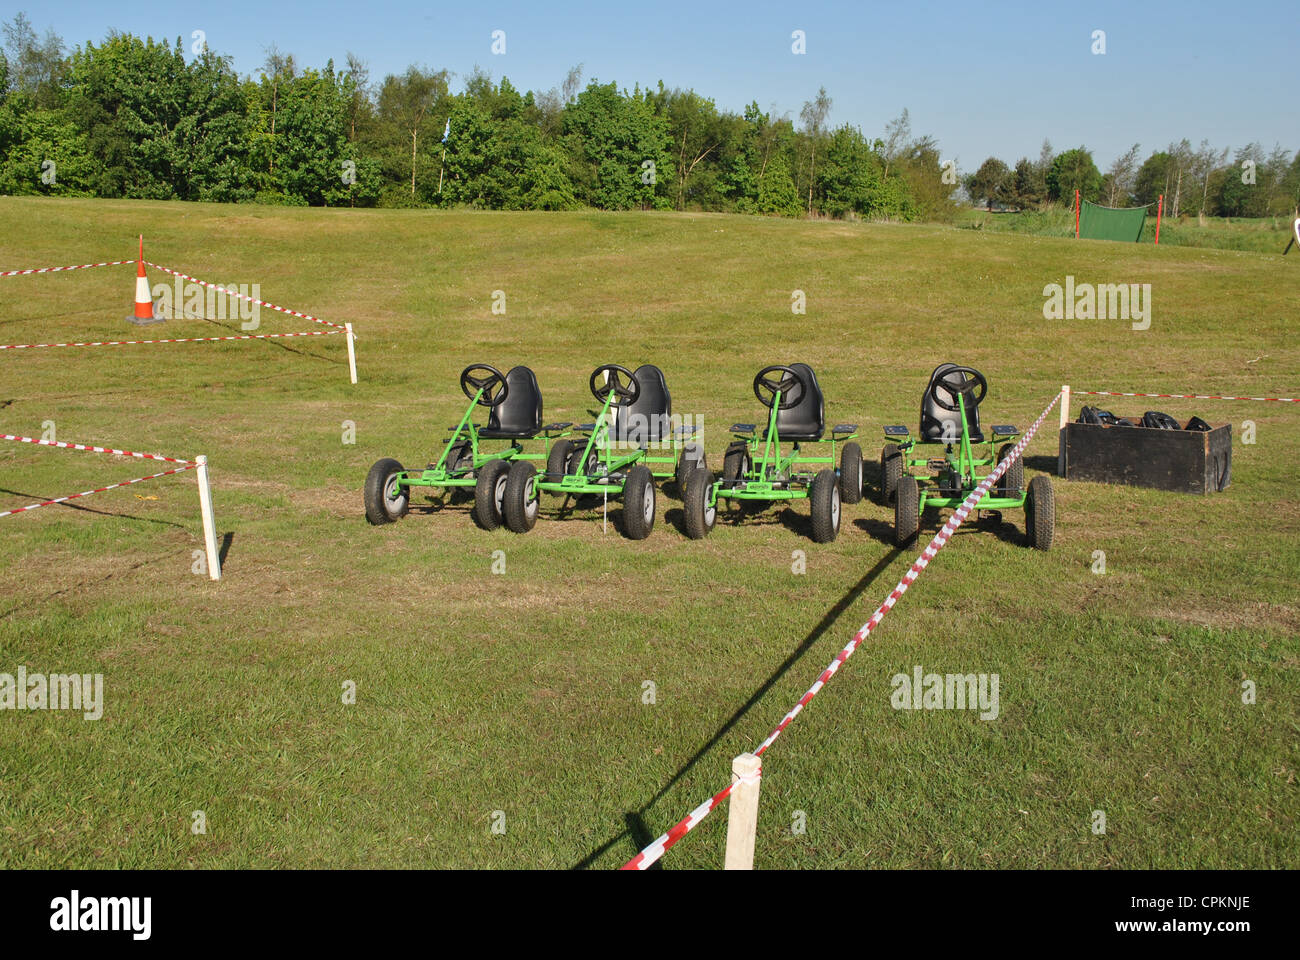 peddle go carts on a grass racing track Stock Photo